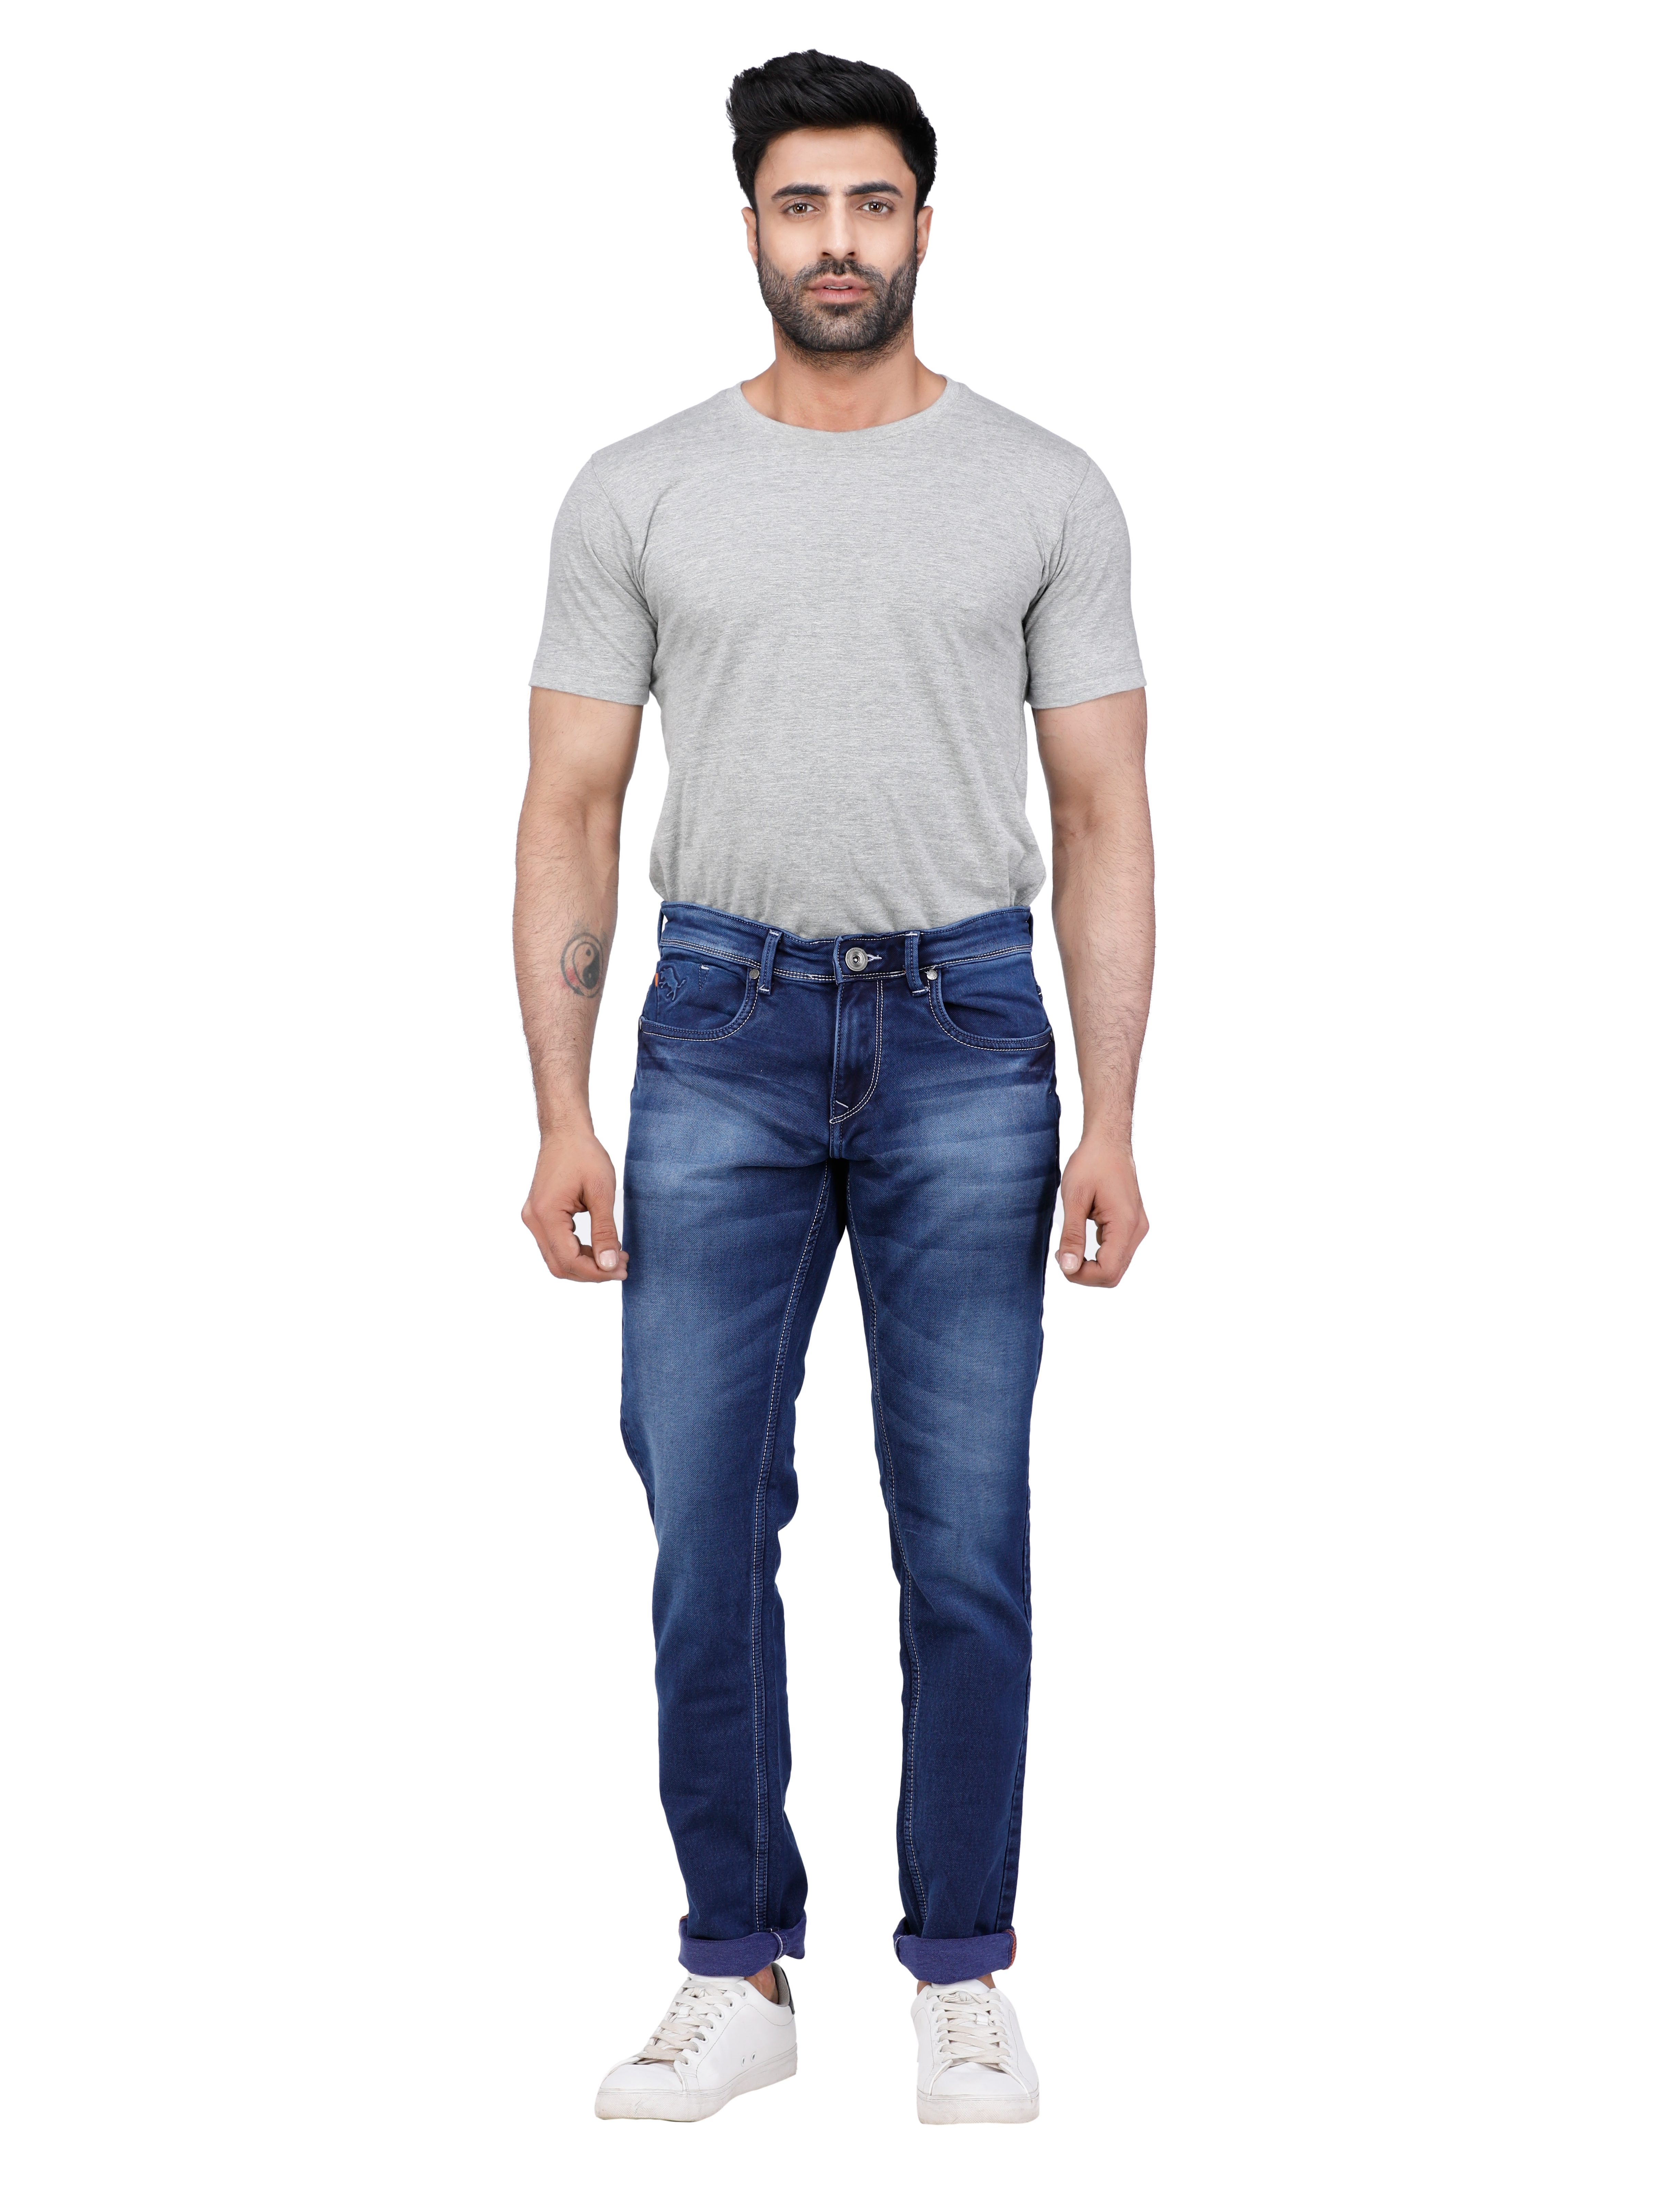 D'cot by Donear | D'cot by Donear Men Blue Cotton Slim Knitted Jeans 4